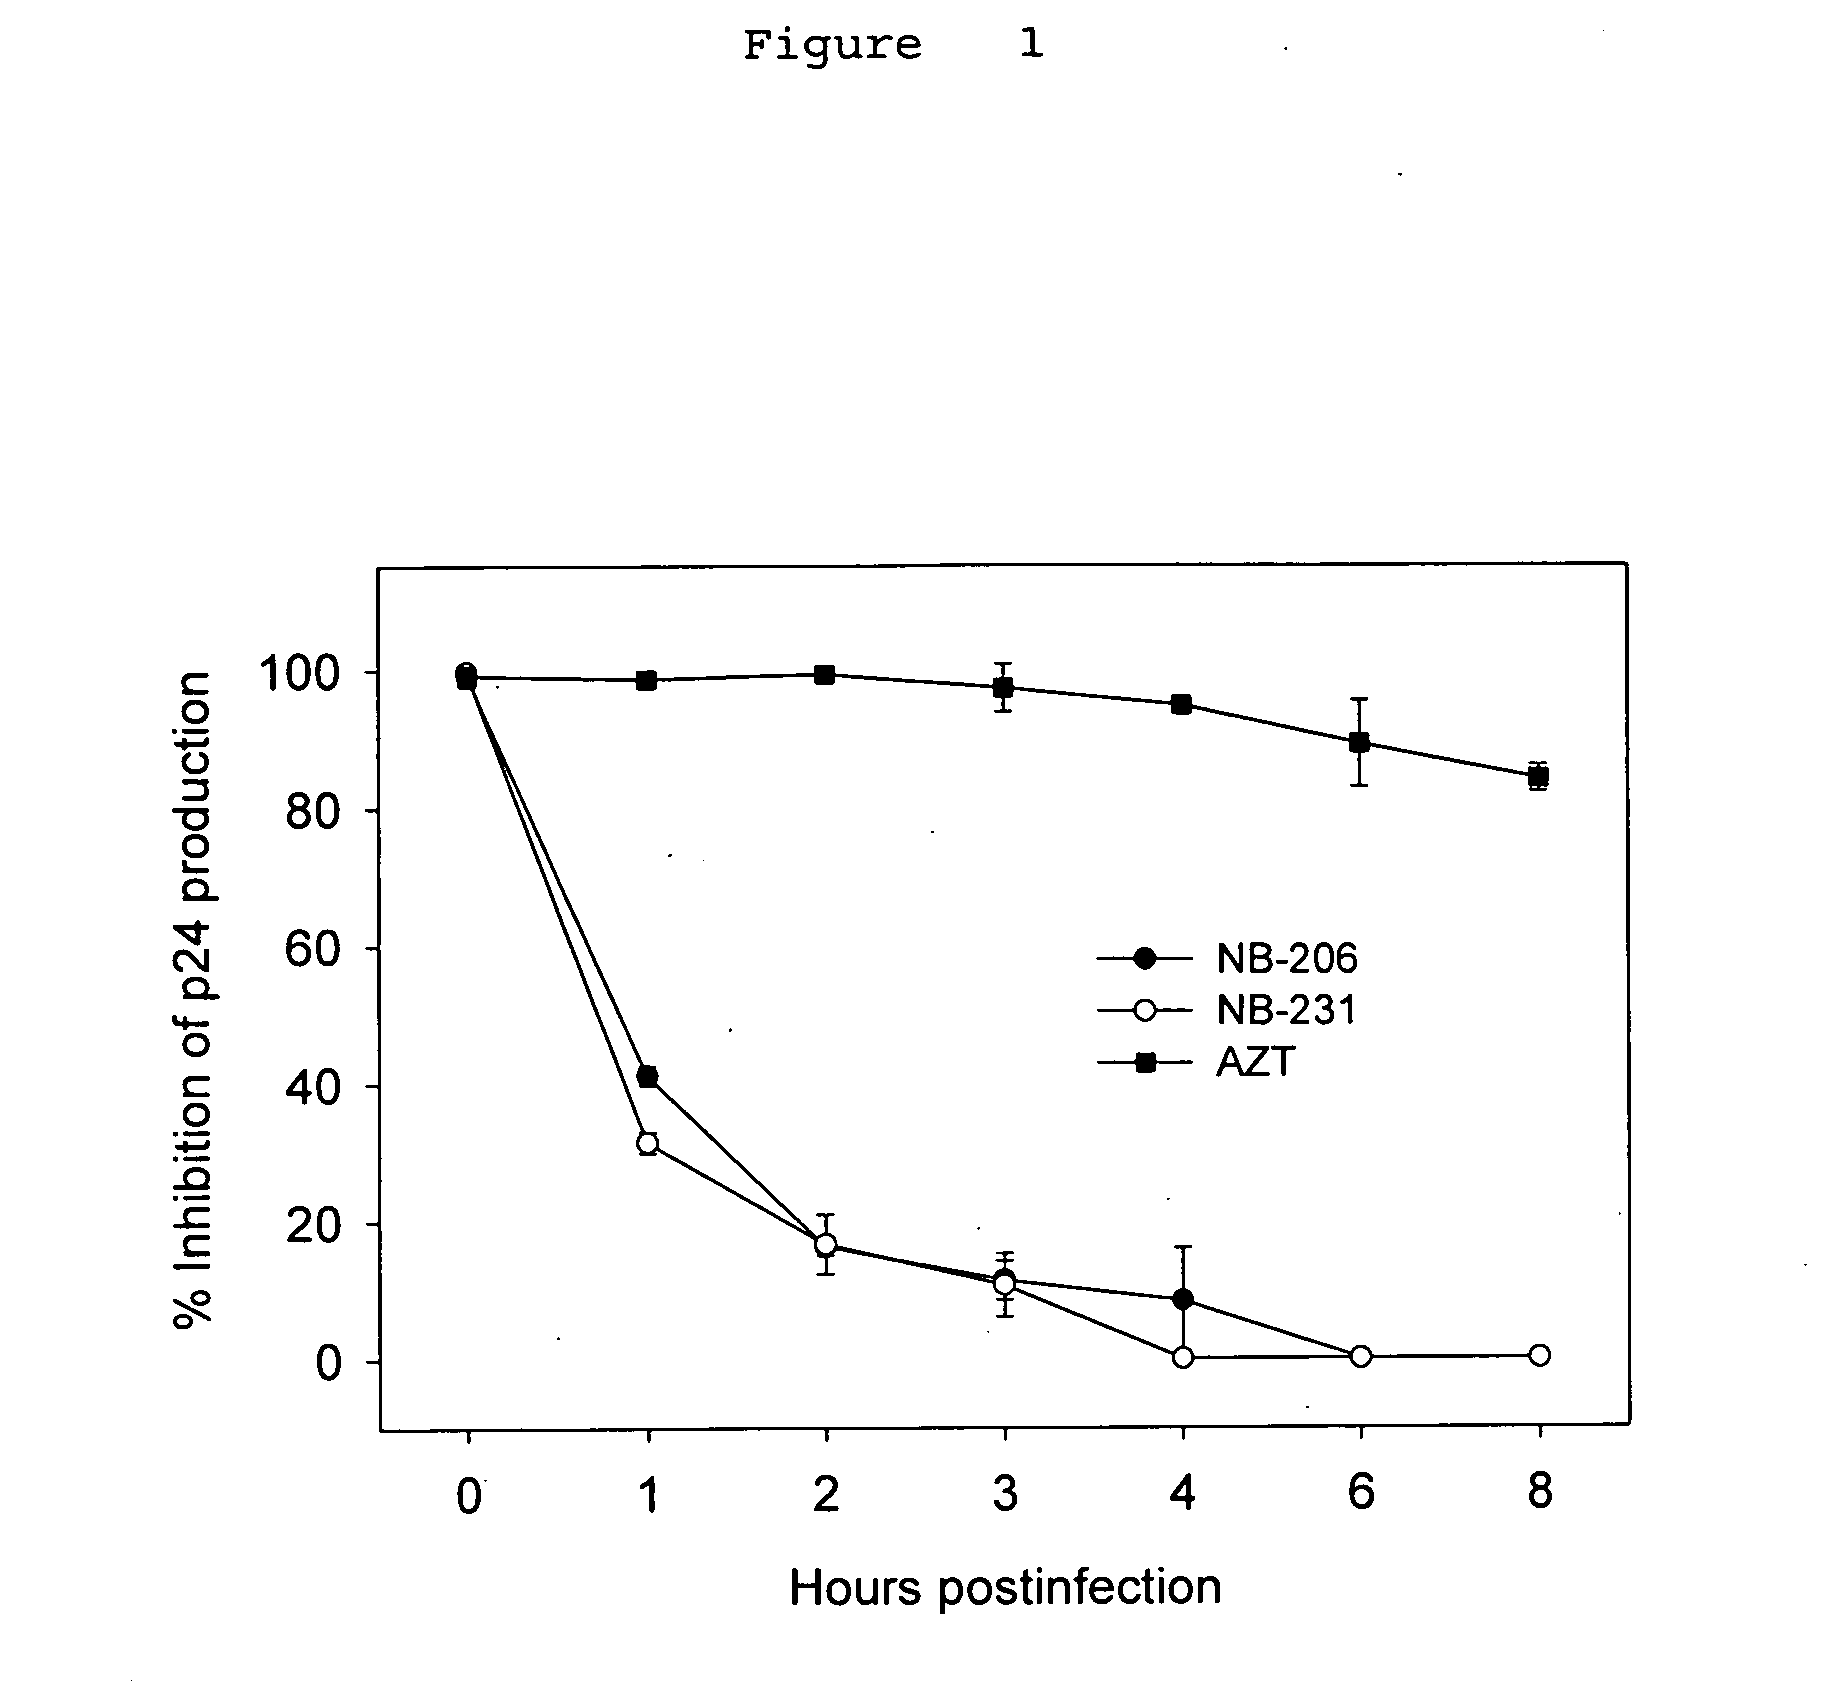 Anti-viral compositions comprising heterocyclic substituted phenyl furans and related compounds